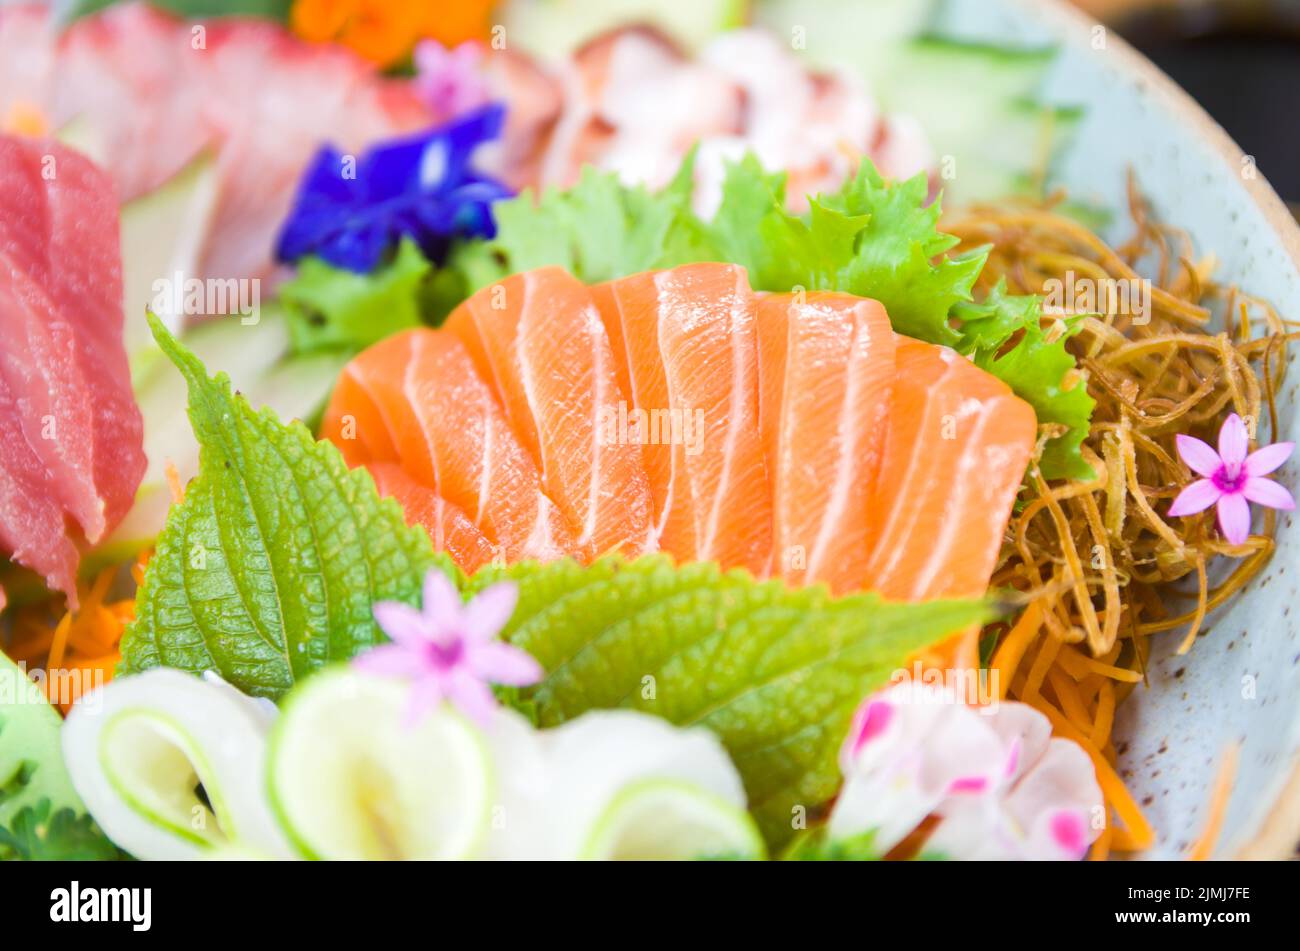 Platter decorated with different flavors of elegant sushi. Stock Photo